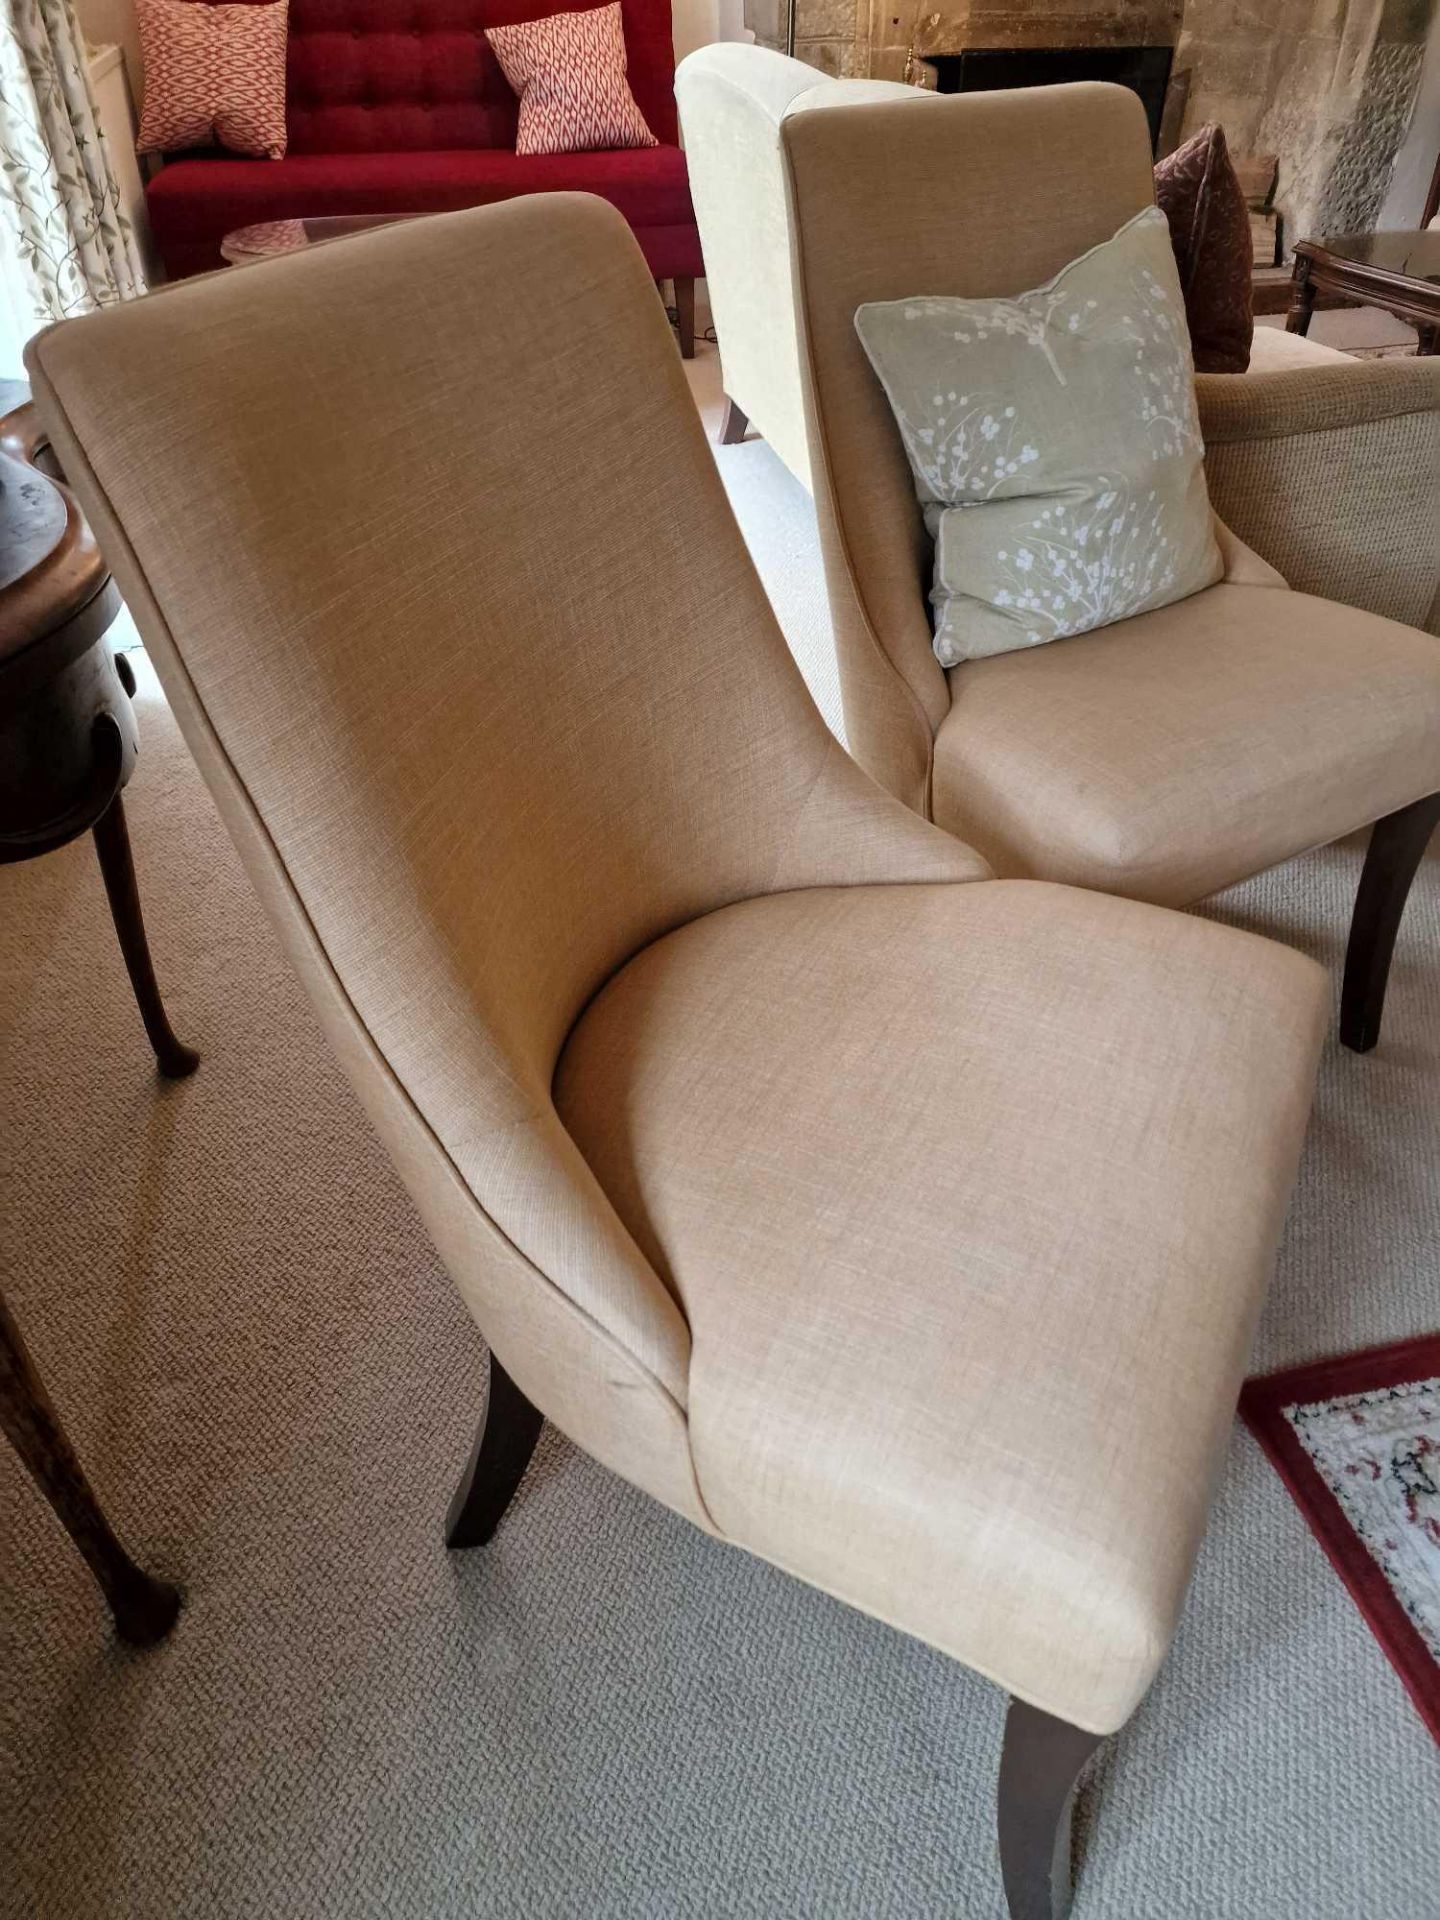 A Set Of 3 X Bourne Furniture 'Stylish Chair' Upholstered In Harlequin Makeda Straw 6226 Taupe. - Bild 3 aus 3